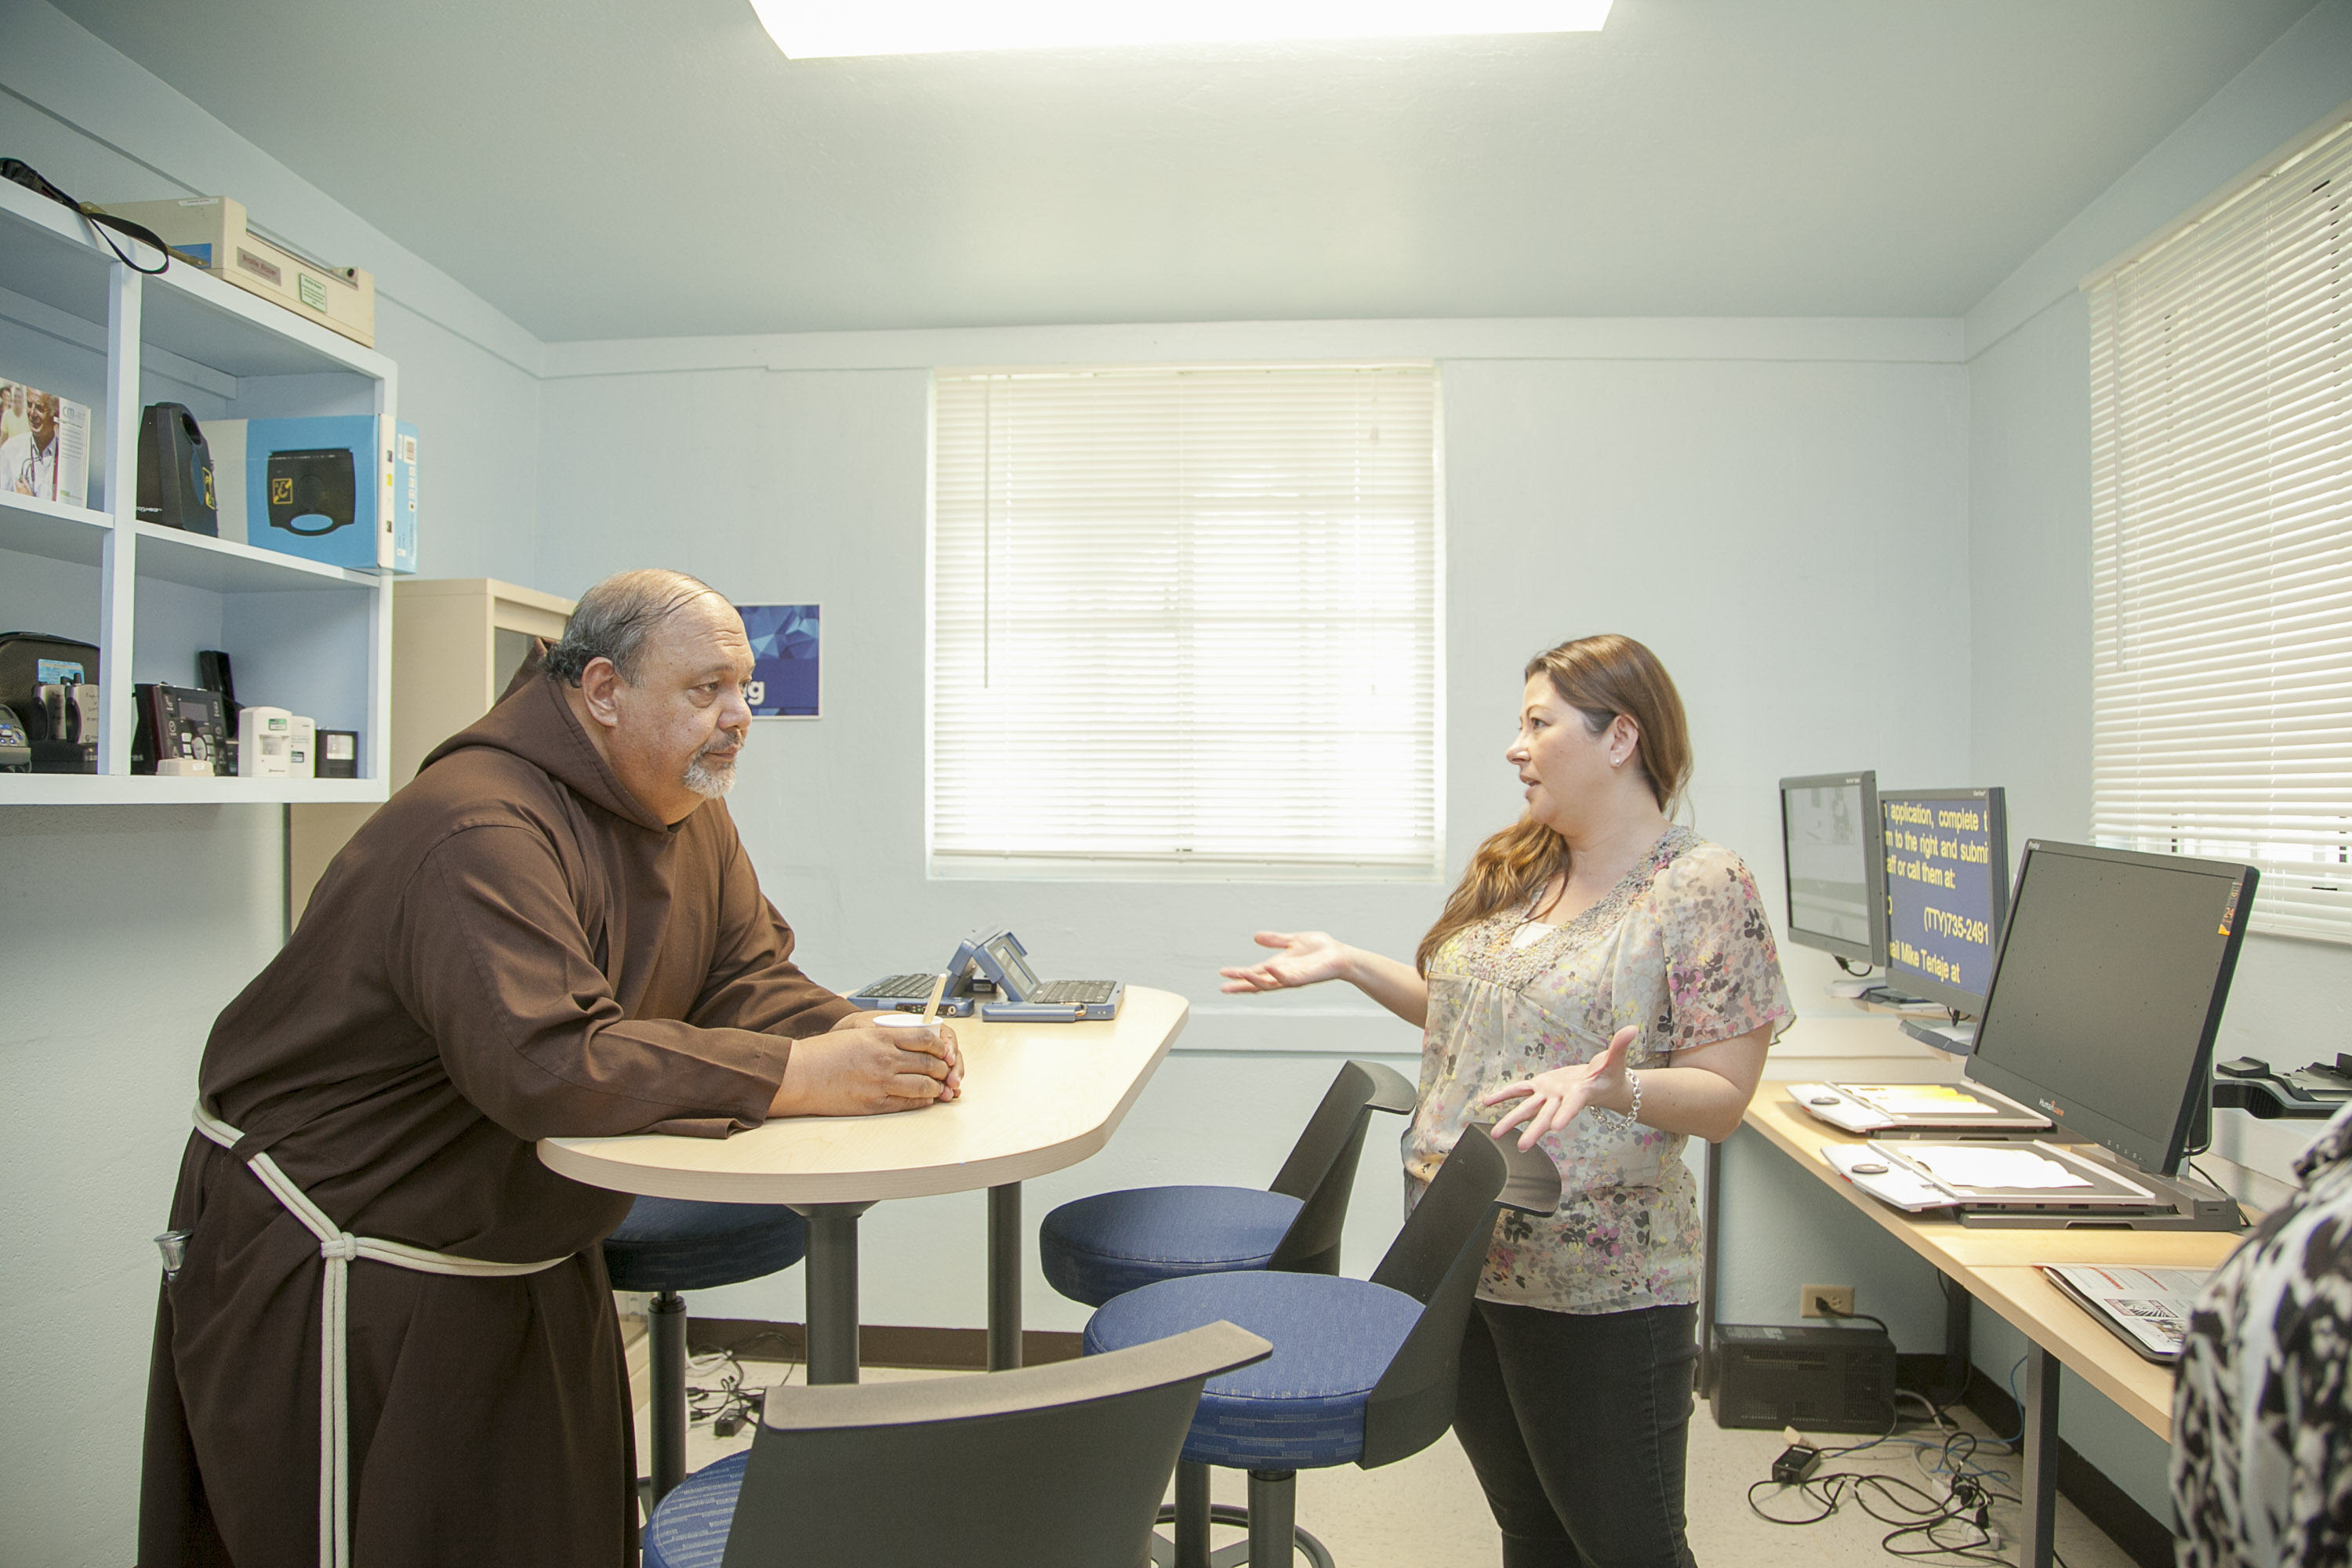 (Left to right) Father Joe listens while Carla Torres shares information on the various AT devices available for people with visual impairments. 